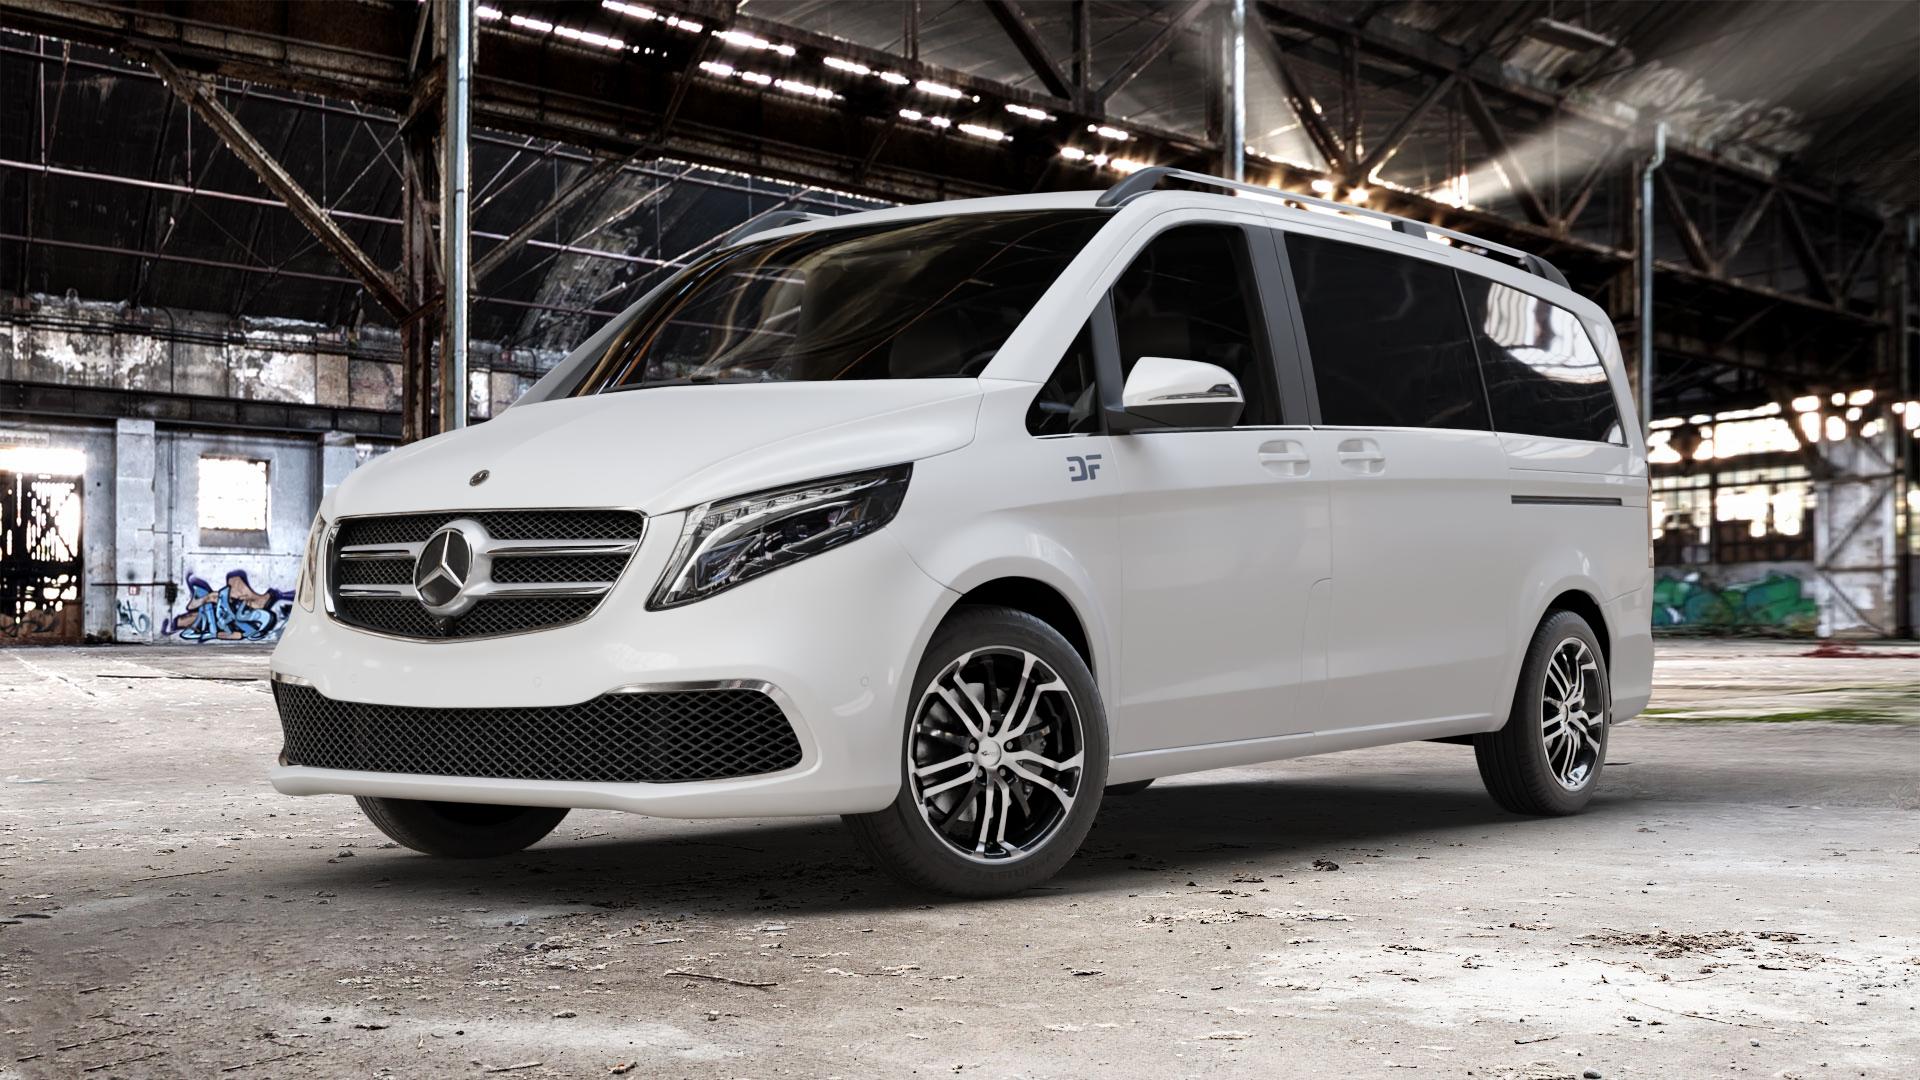 Mercedes Vito Mixto Type W447 Facelift 2,0l 124d 4Matic 174kW (237 hp)  Wheels and Tyre Packages